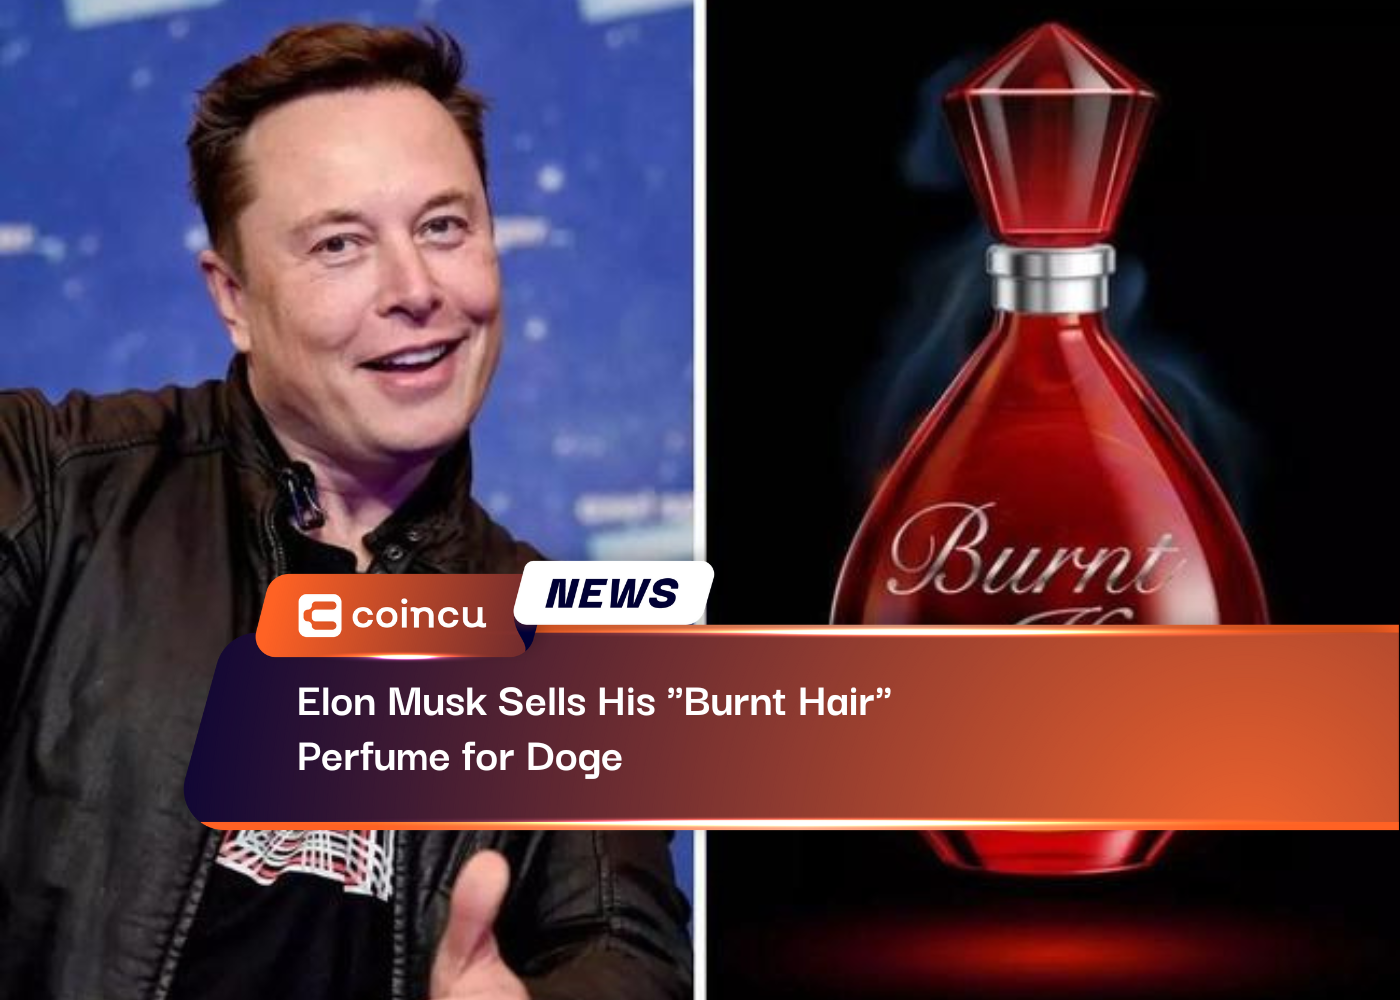 Perfume for Doge